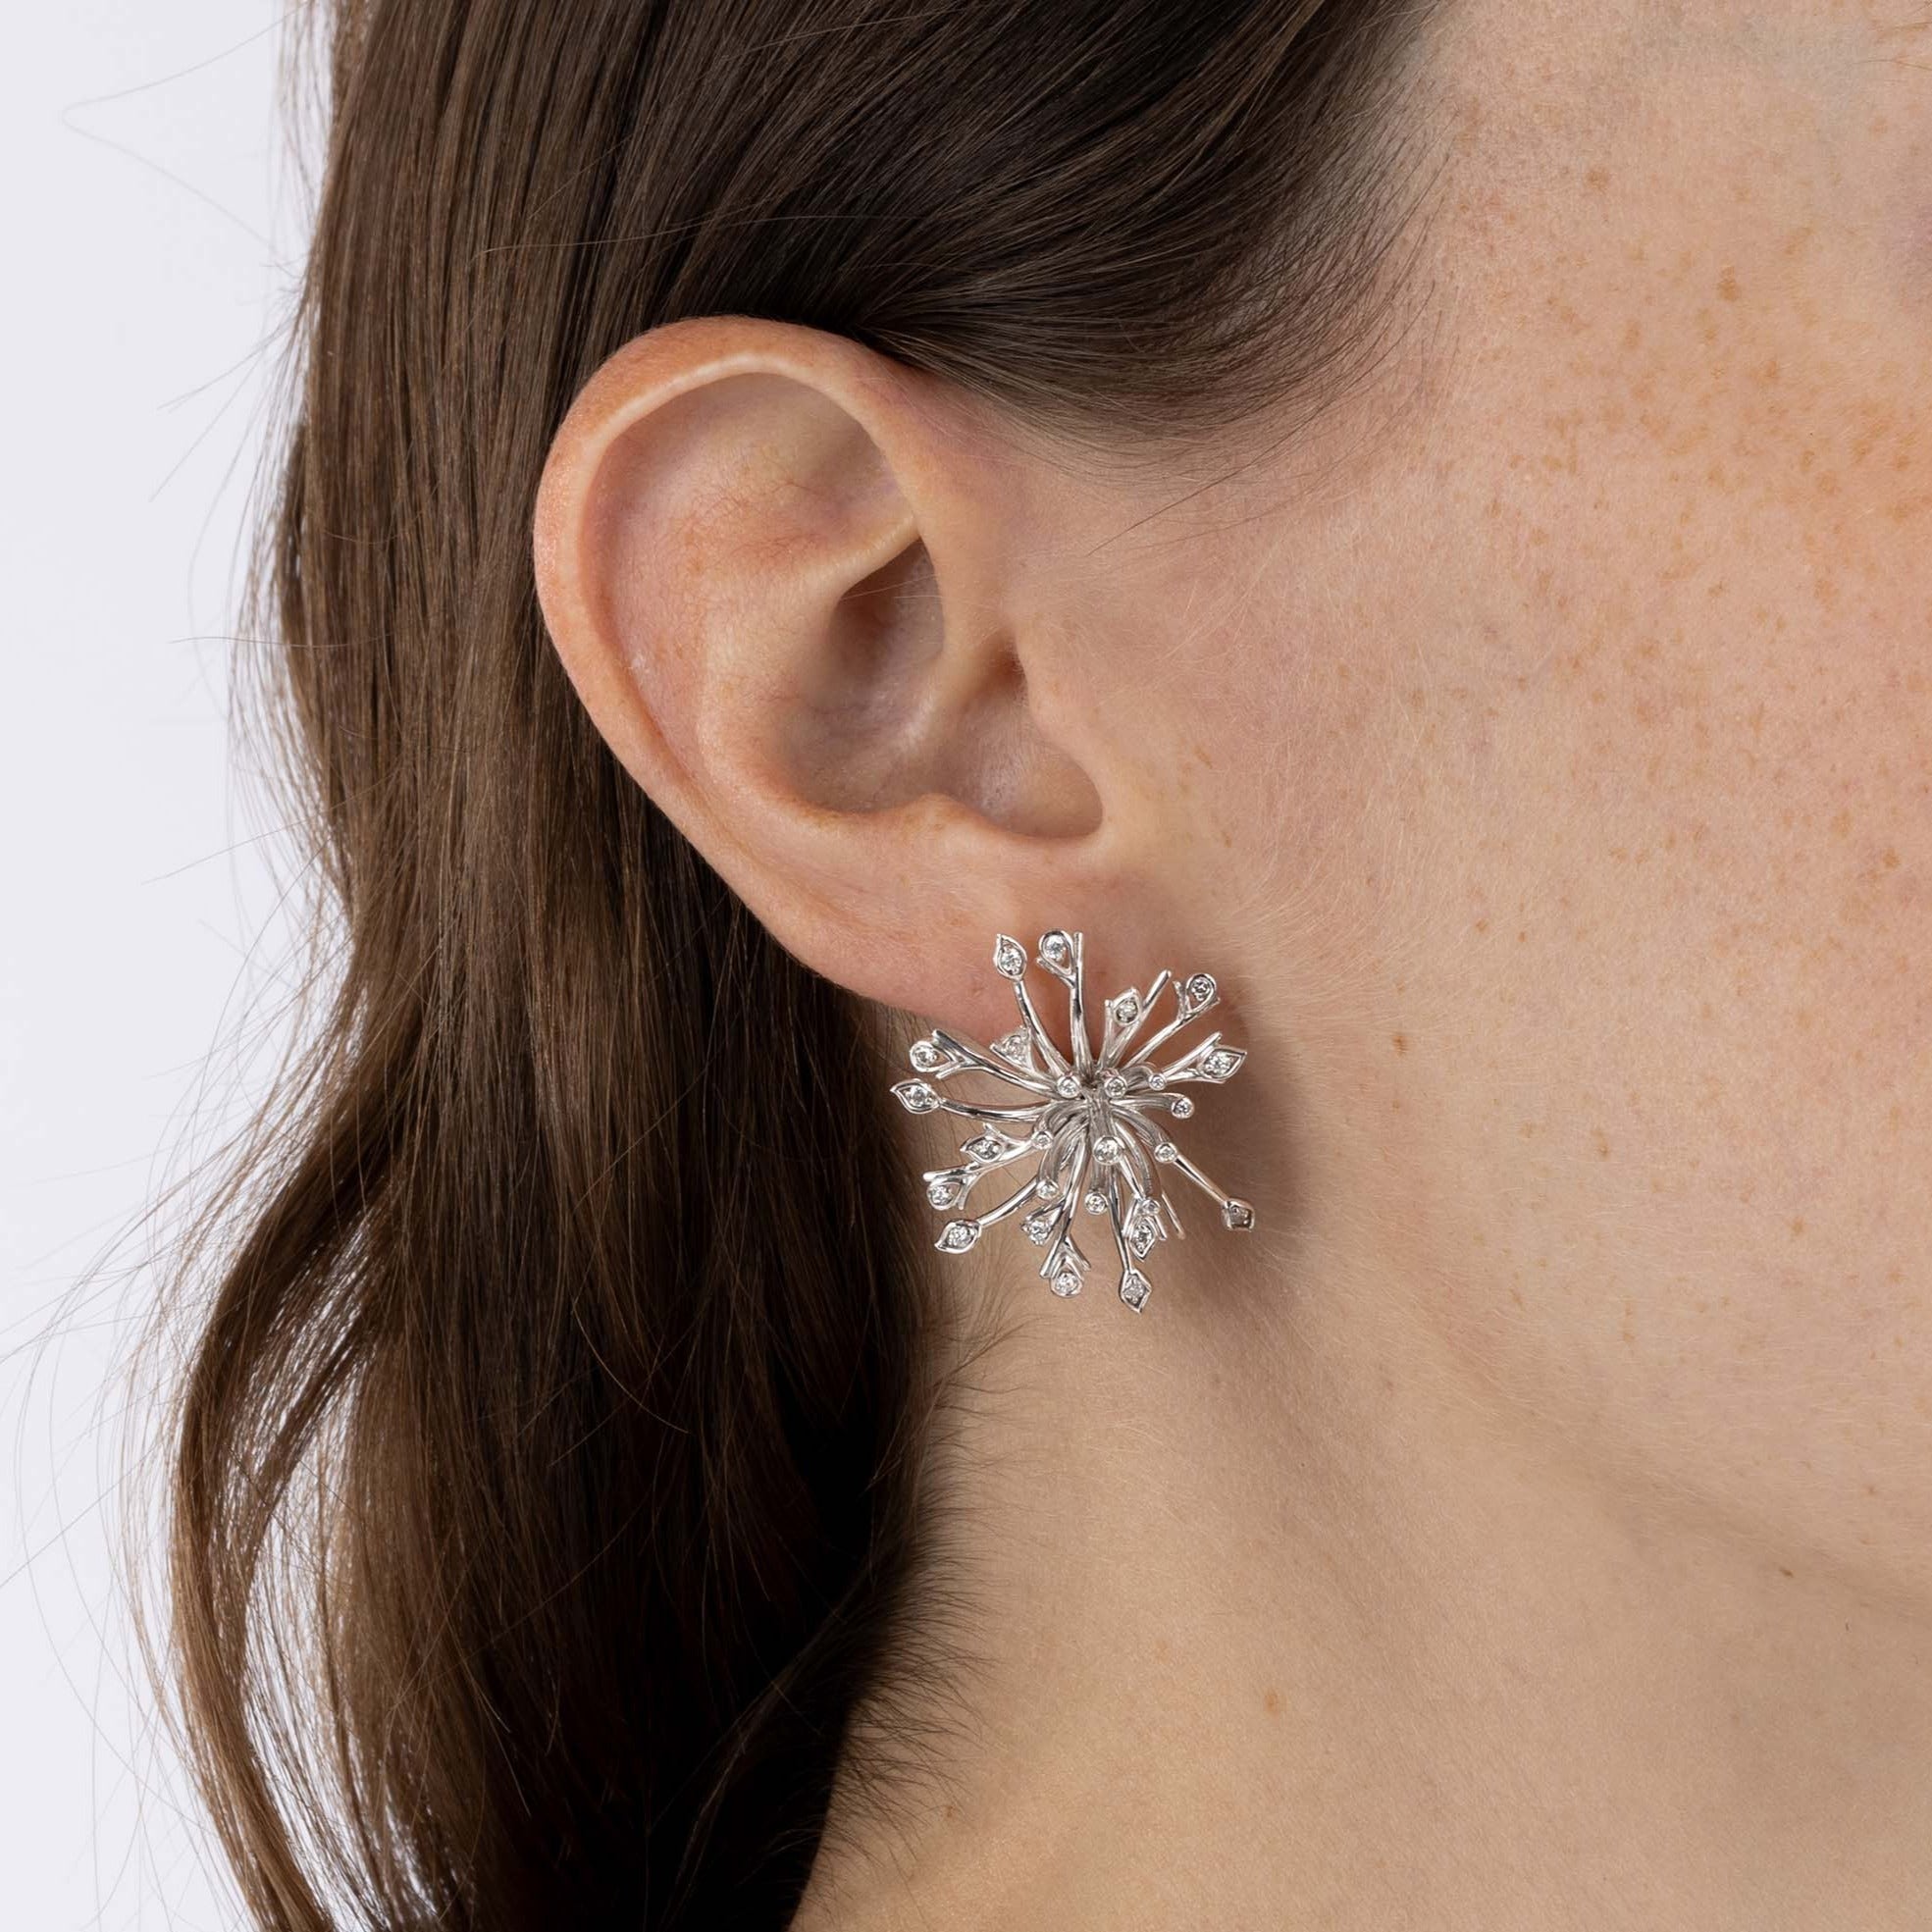 White Gold Earrings, resembling a dandelion flower, with small round Diamonds, Large - Model shot